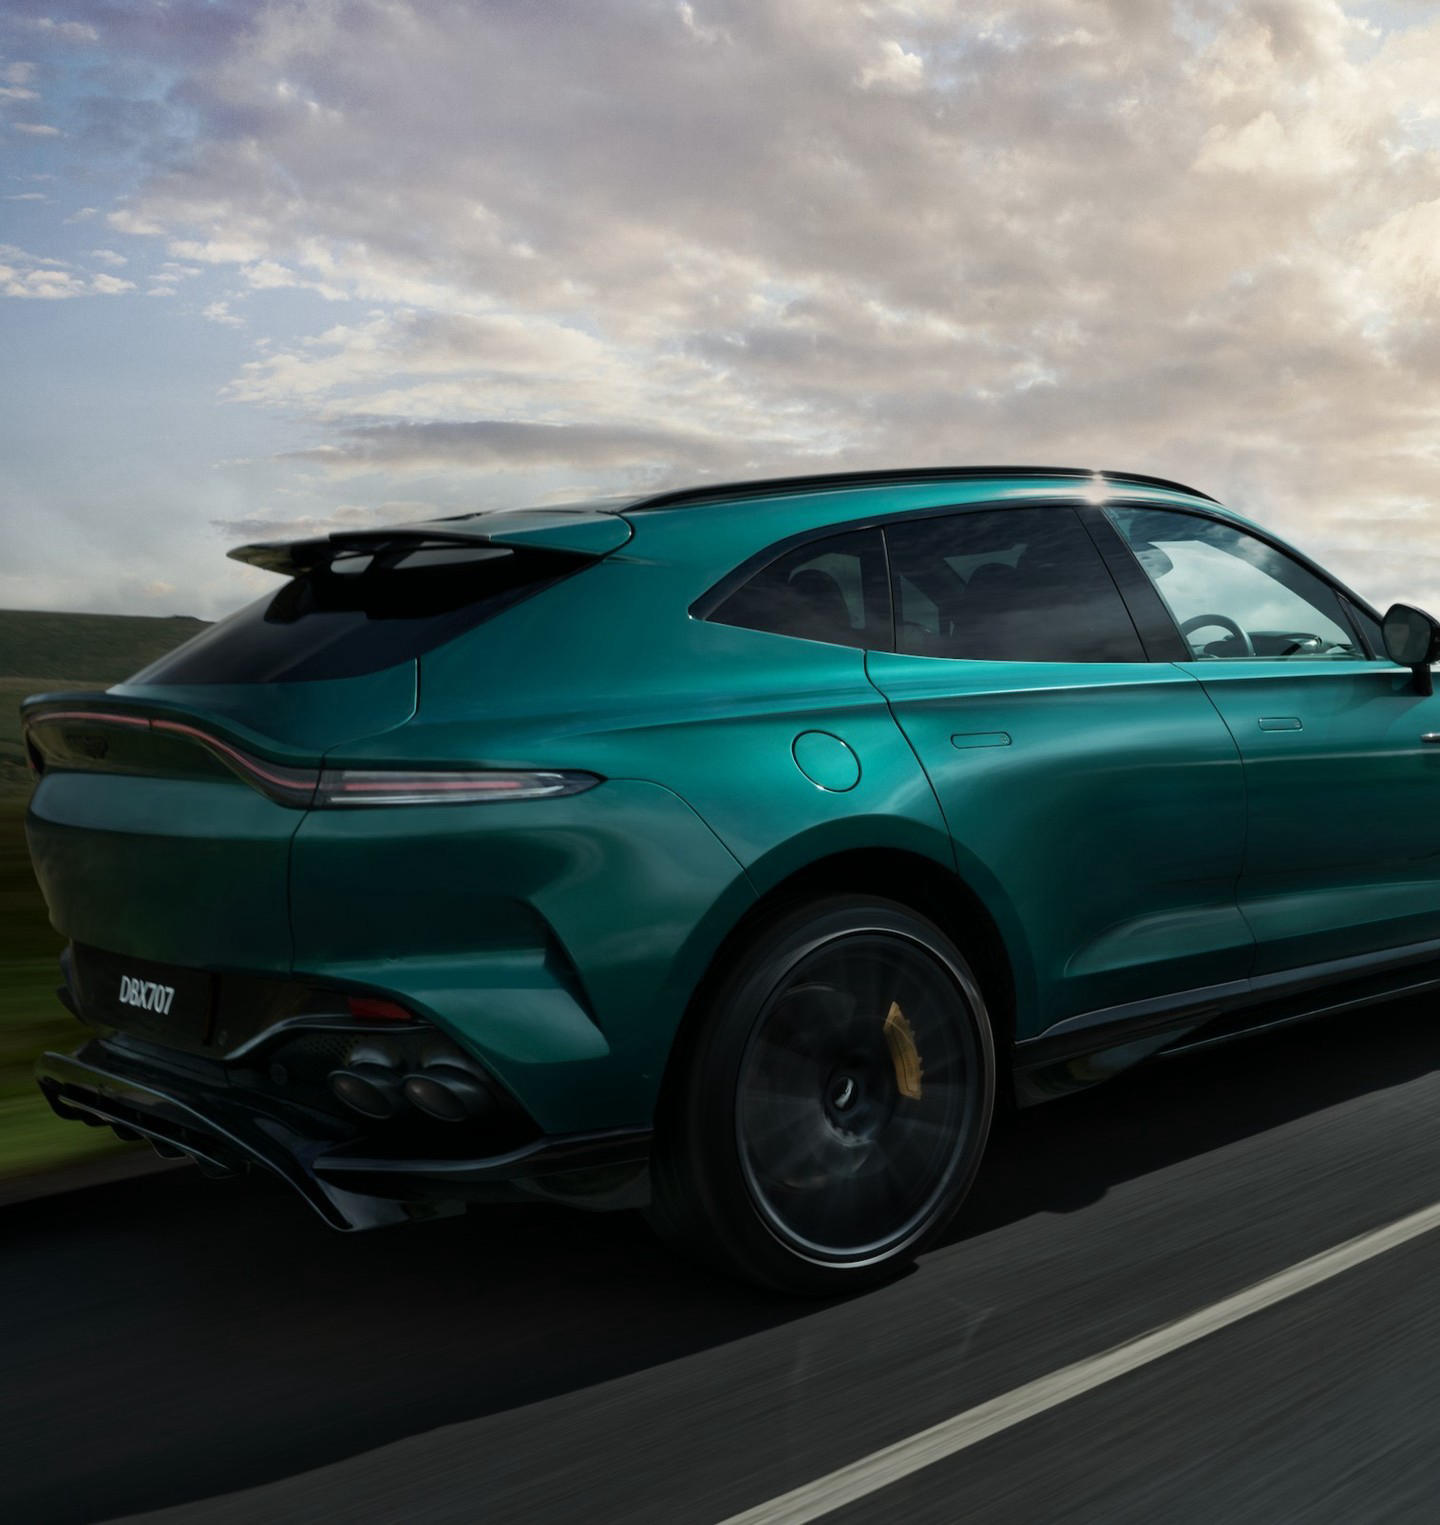 Aston Martin - Raw power coupled with immersive V8 twin-turbo acoustics